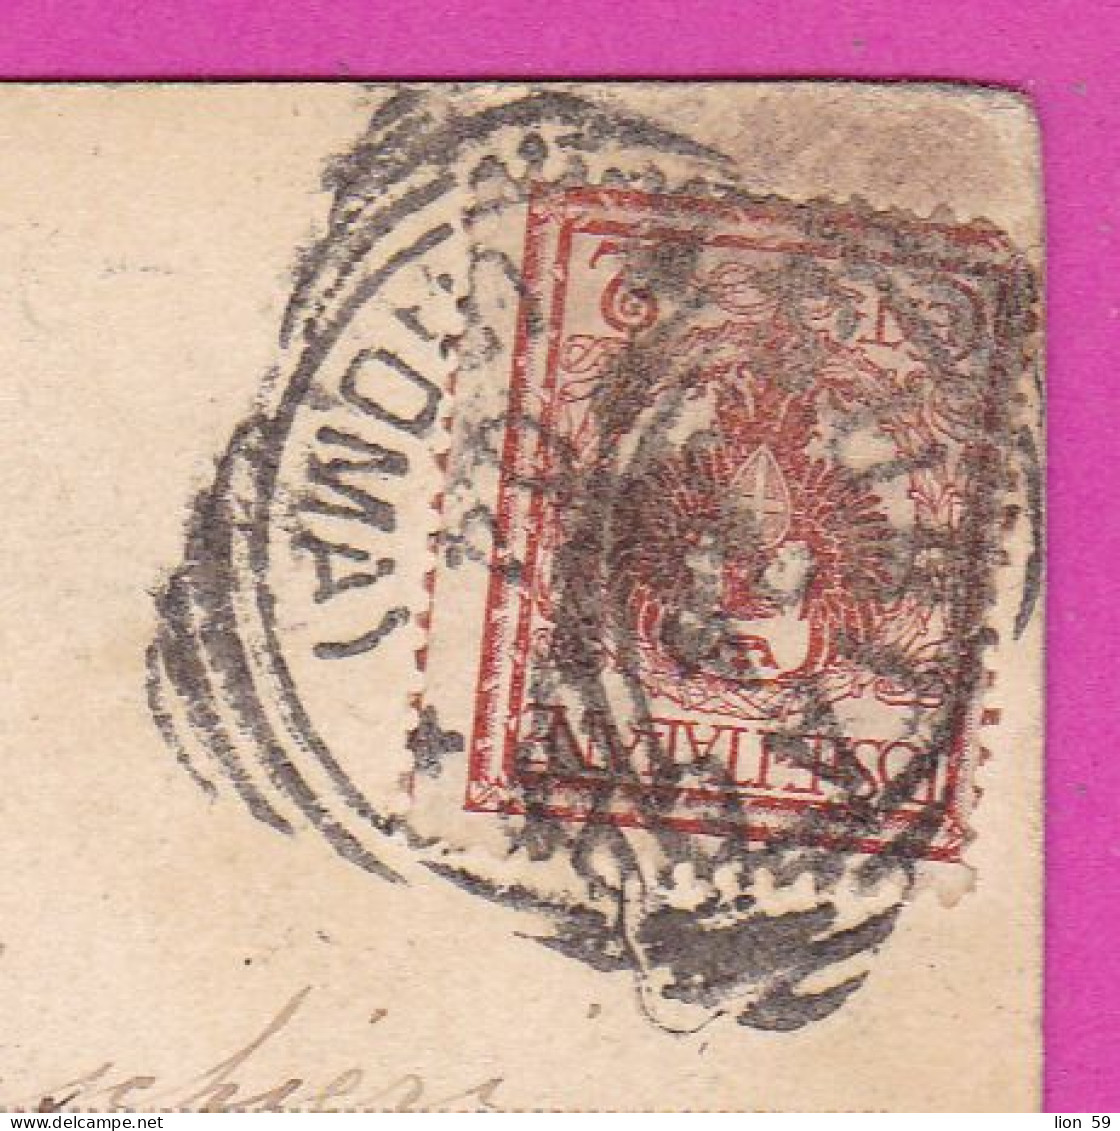 294074 / Italy - SUBIACO Interno Del 3 Chiostro ( XII Secolo)  PC 1904 USED - 2 Cent Eagle With Coat Of Arms - Storia Postale